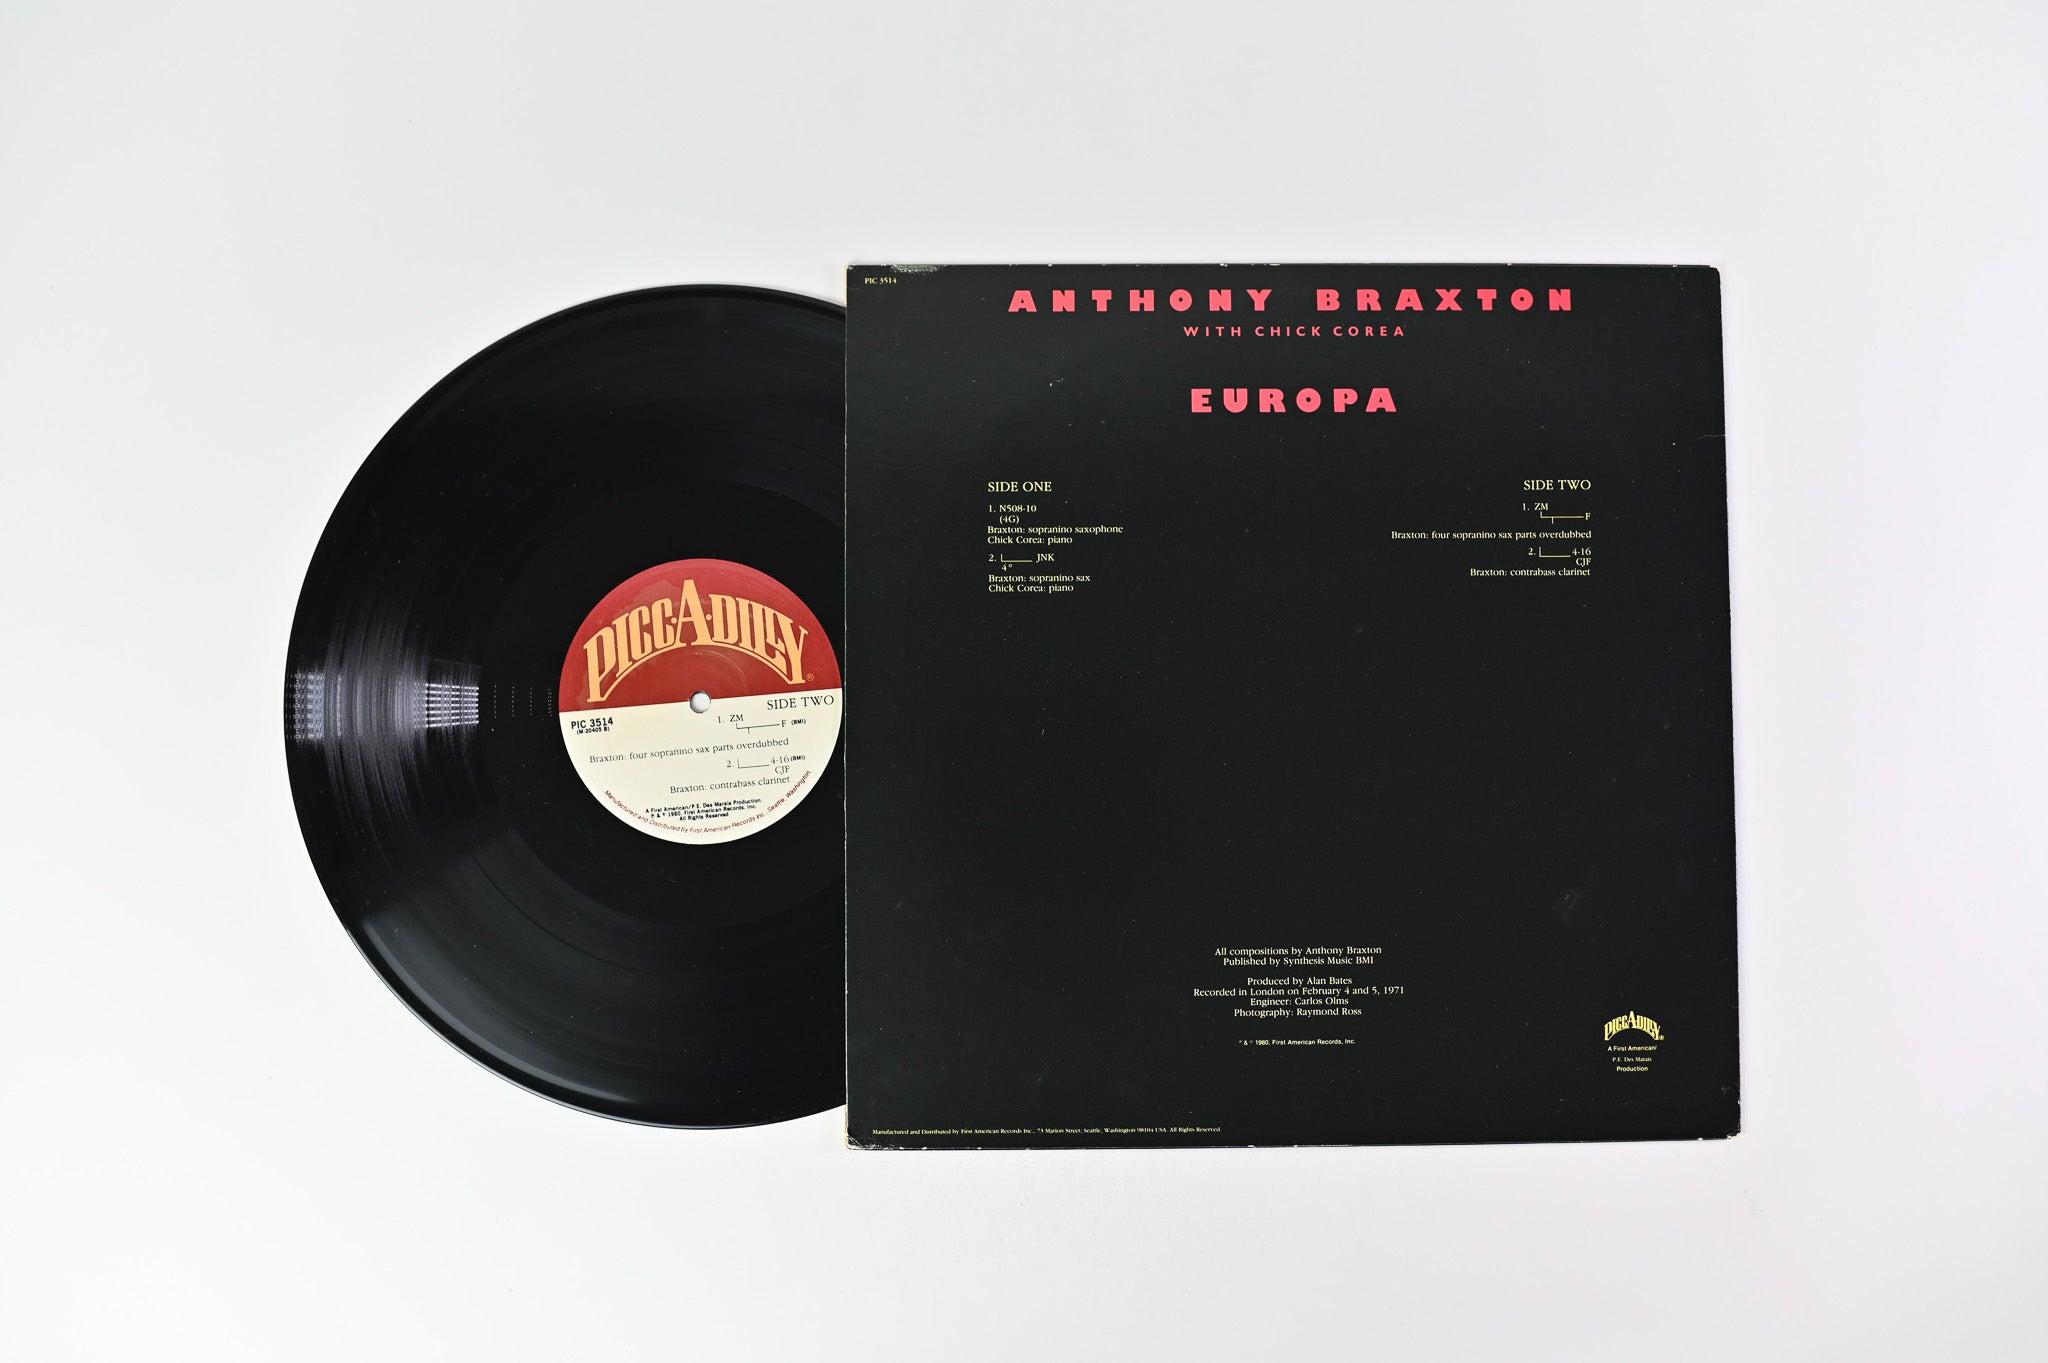 Anthony Braxton With Chick Corea - Europa on Picc-A-Dilly